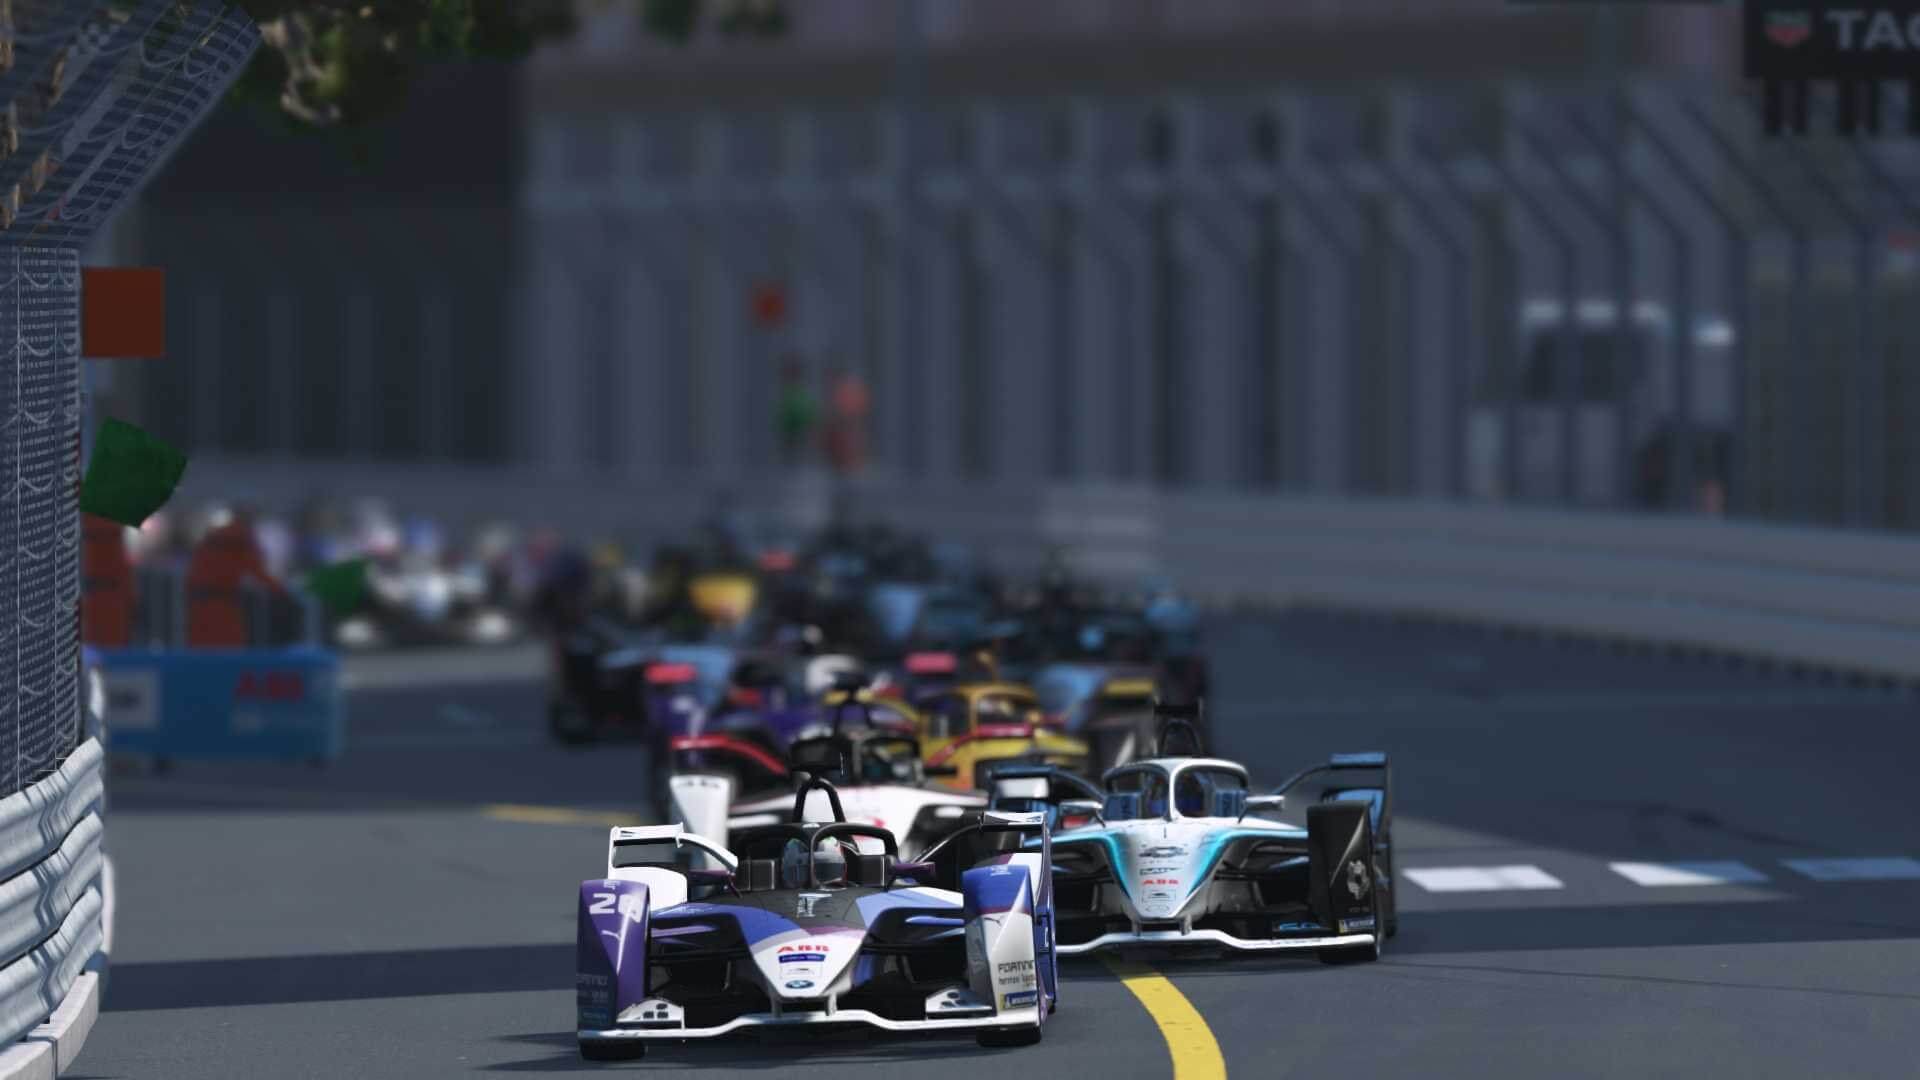 Formula E driver disqualified after eSports pro took his place in virtual race